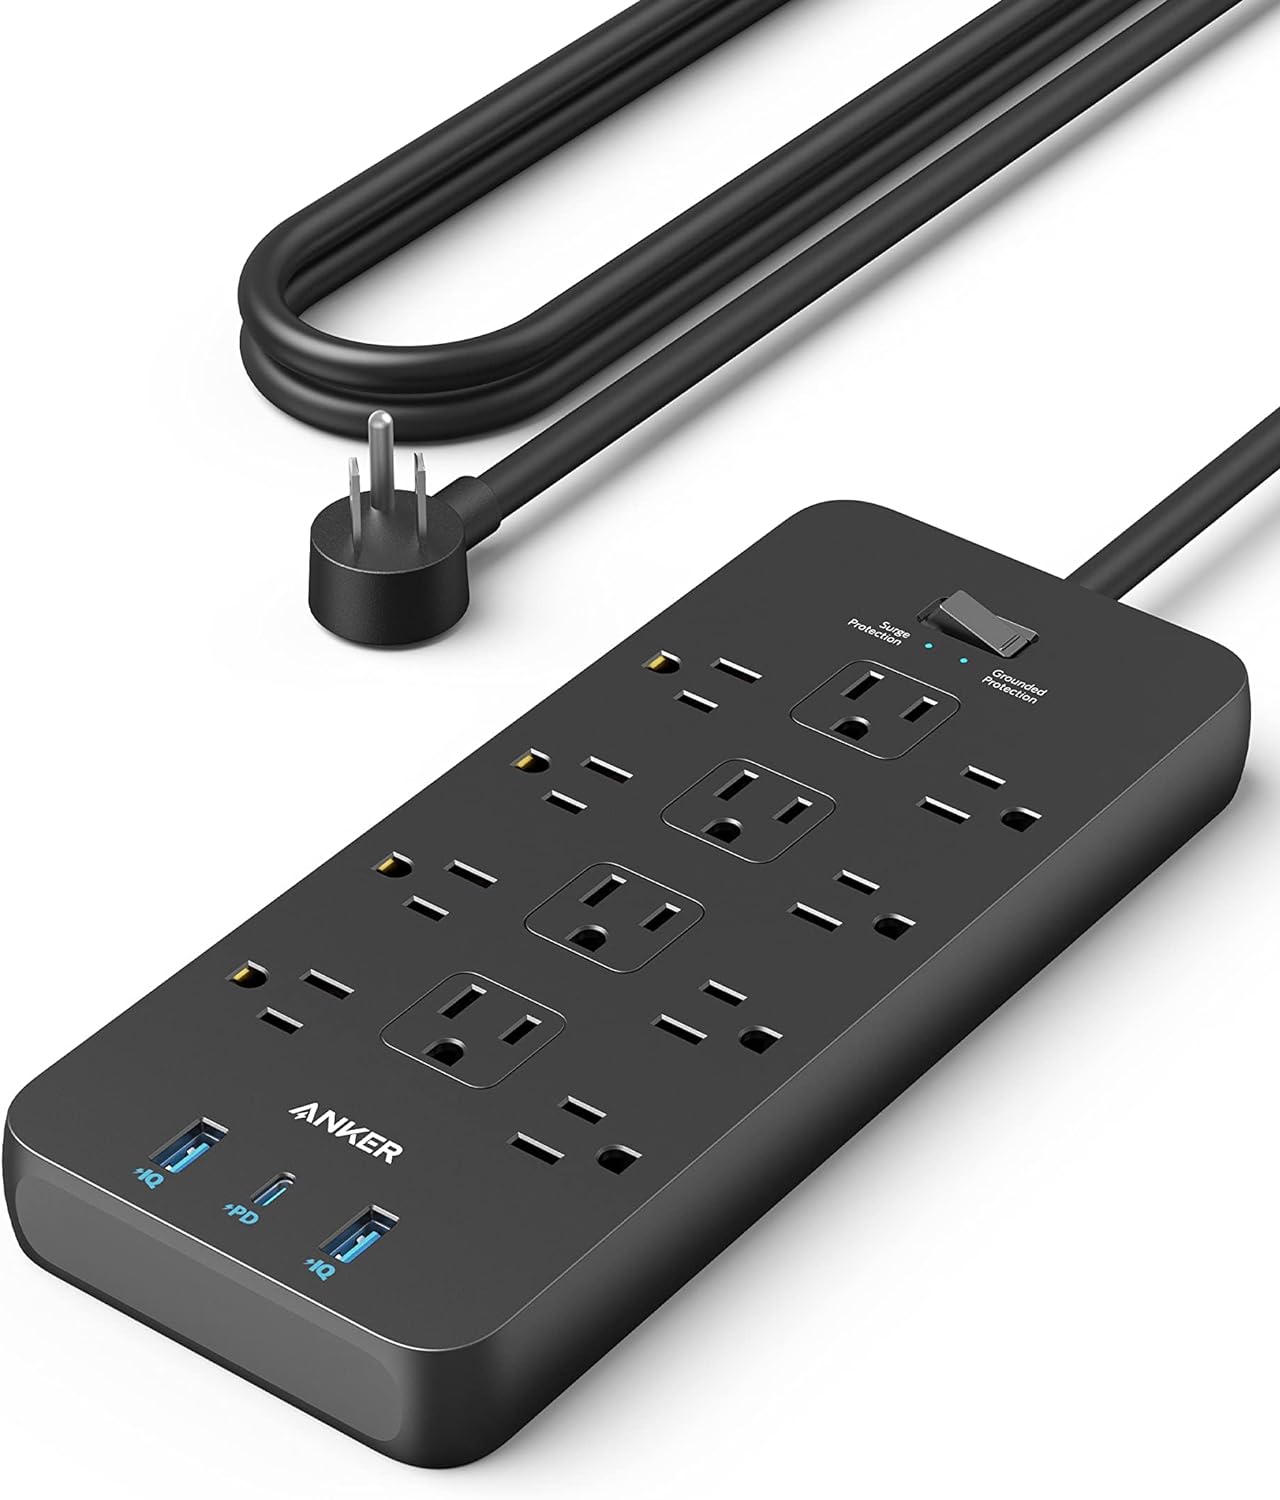 12-Outlet Surge Protector 6 ft. Braided Cord USB Coax, Black $22